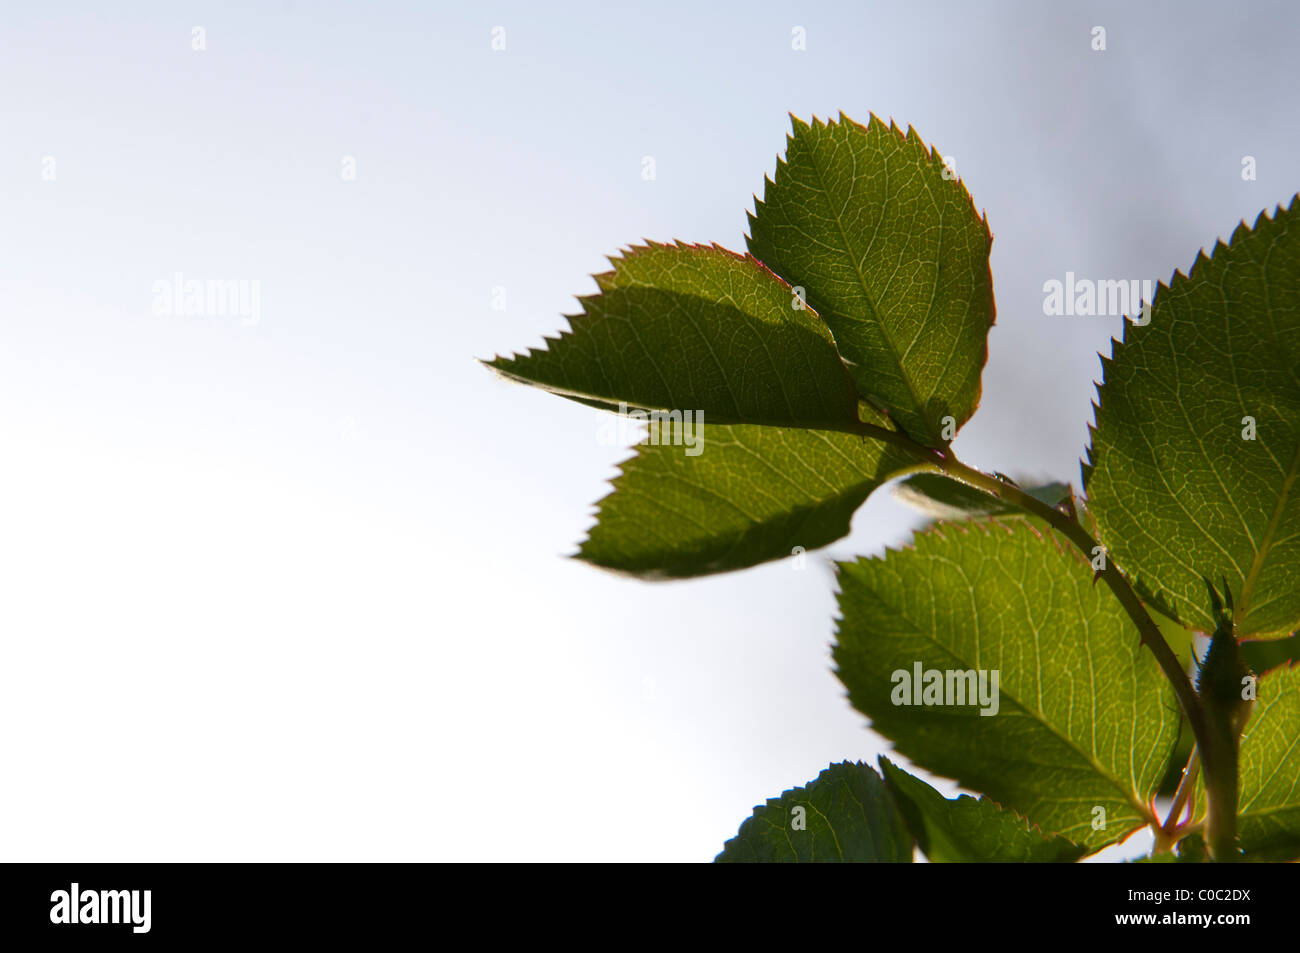 Rose Leaves Royalty Free Stock Images - Image: 35031849